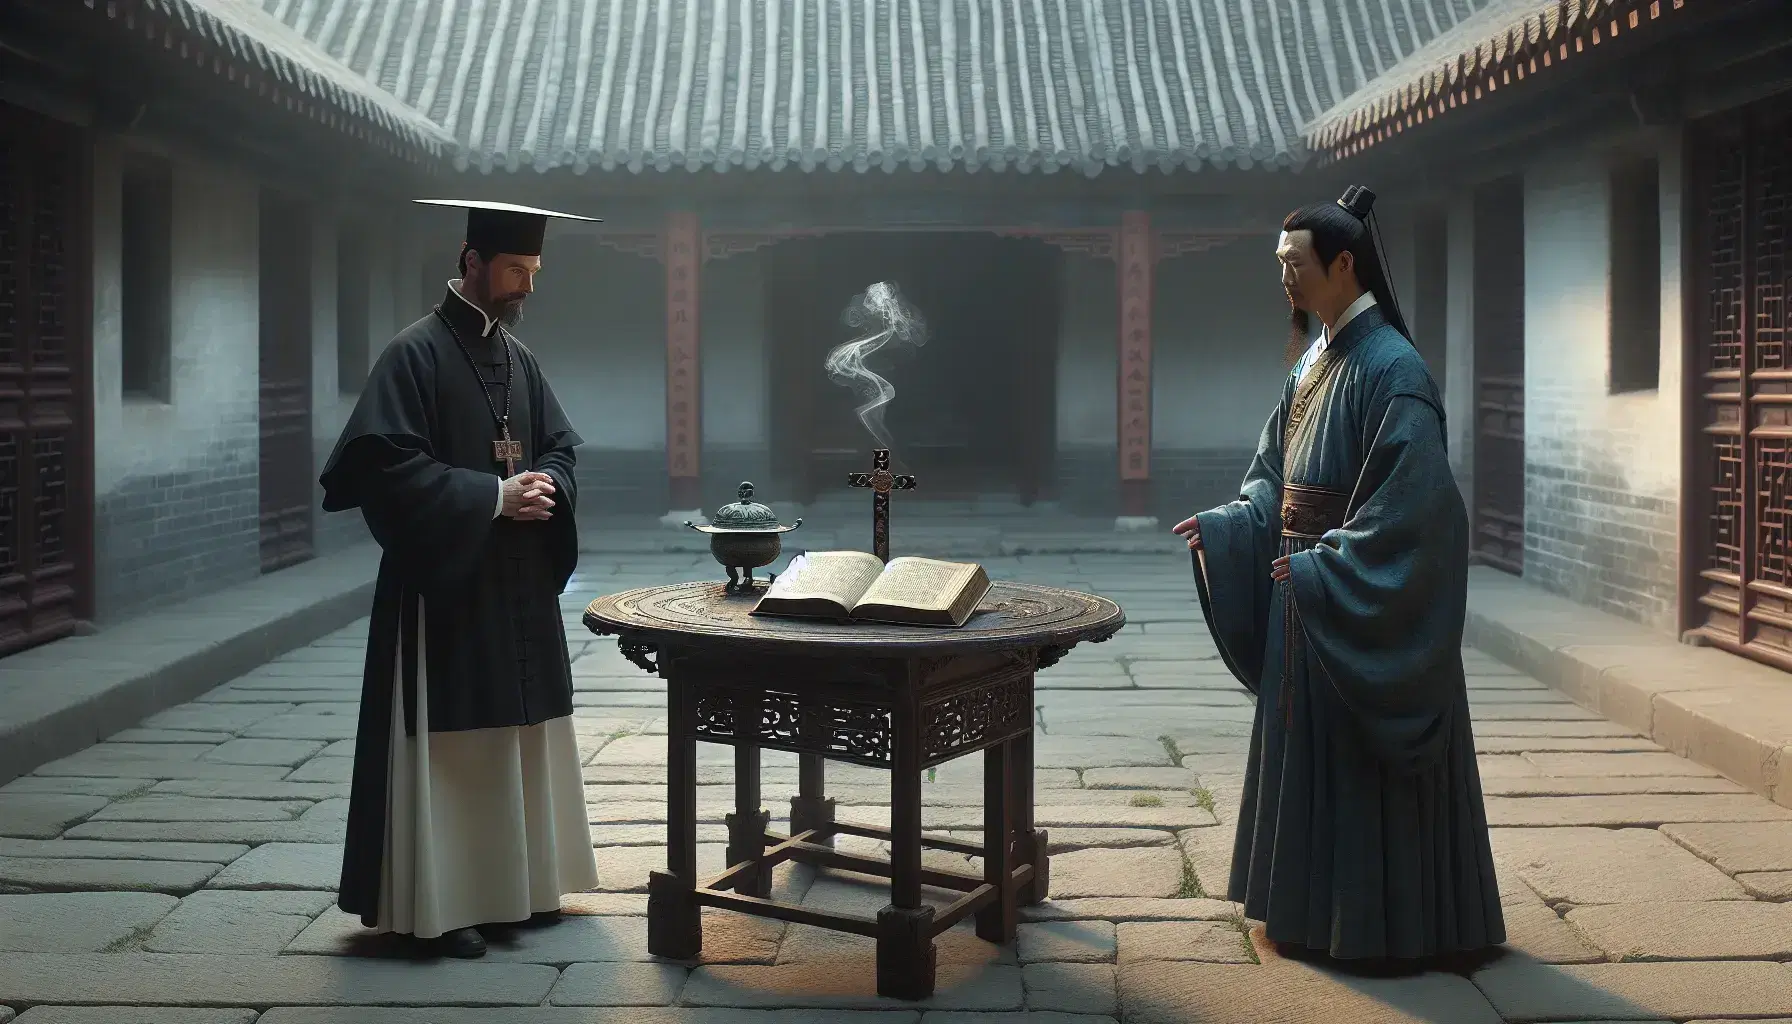 European missionary and Chinese scholar converse in an ancient courtyard with a book, crucifix, and incense burner, set against a tranquil Chinese garden backdrop.